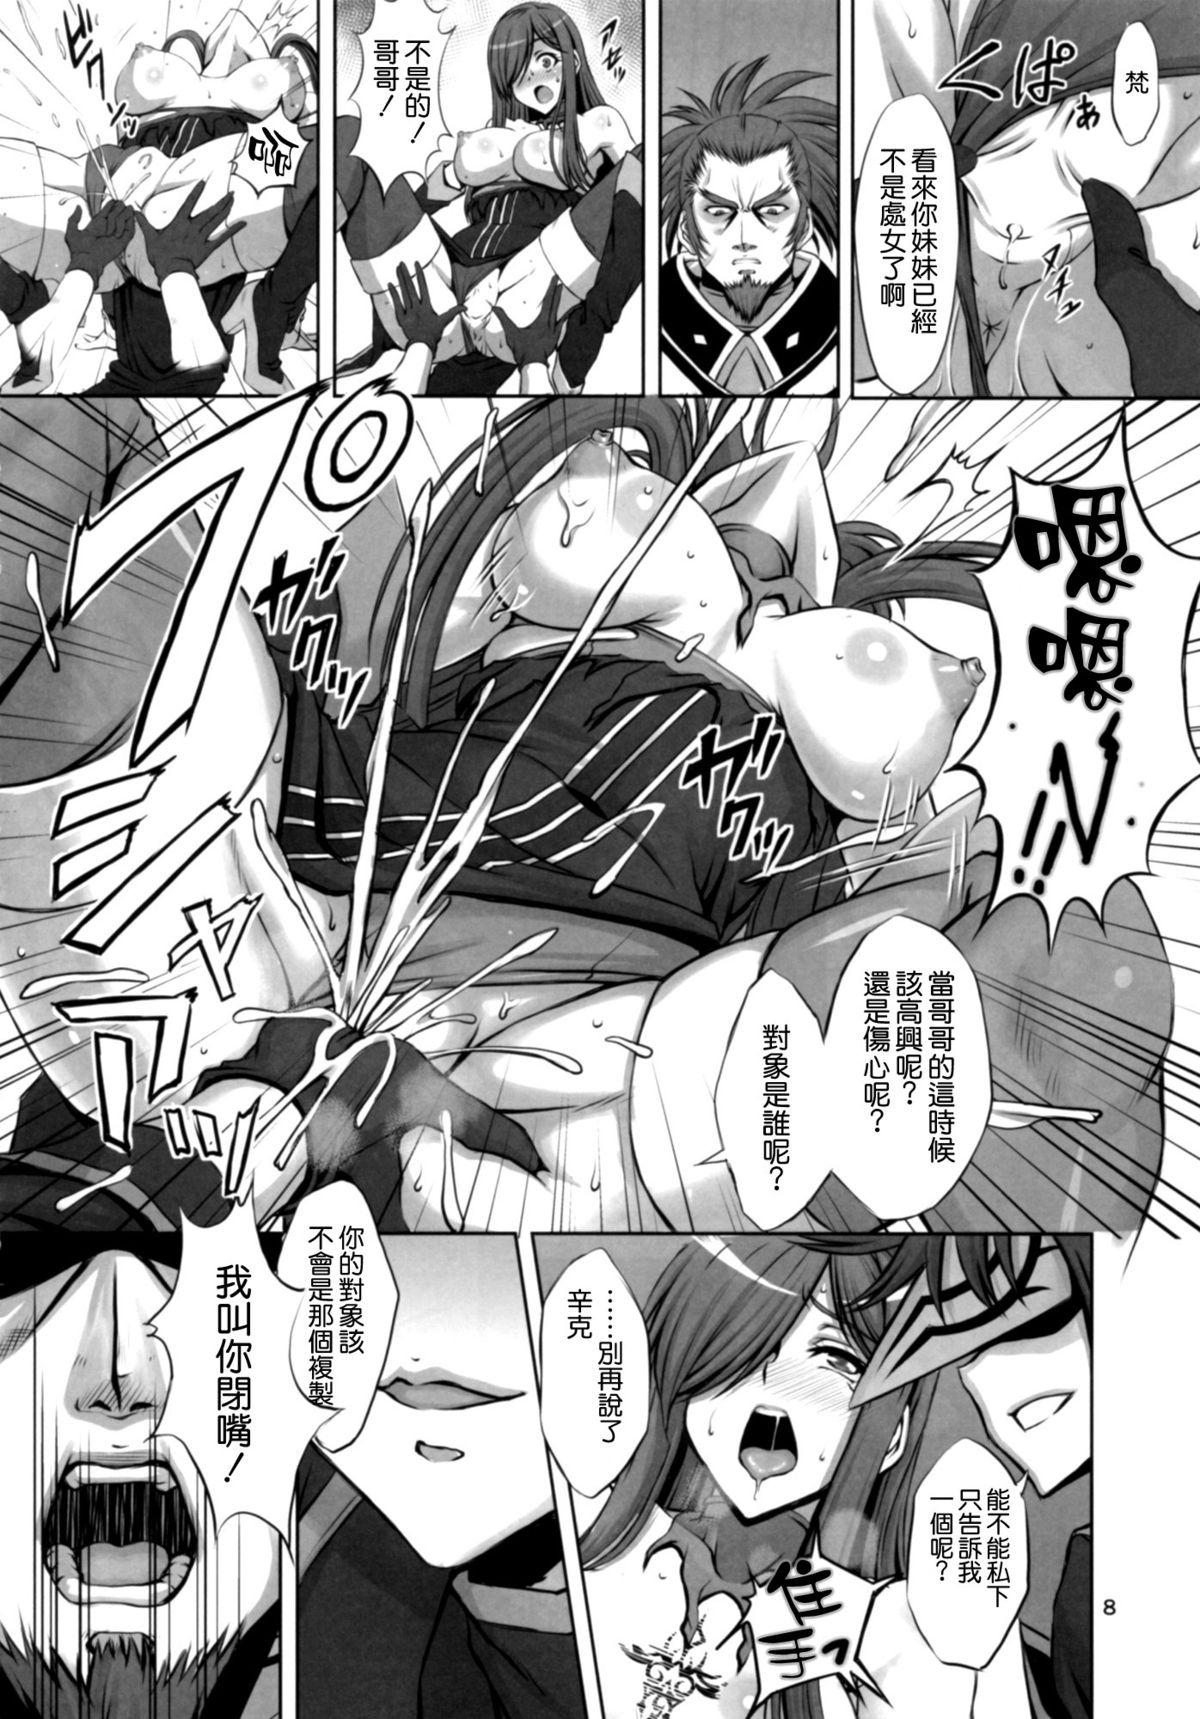 Massive Shin ◎ - Tales of the abyss Lesbian - Page 8